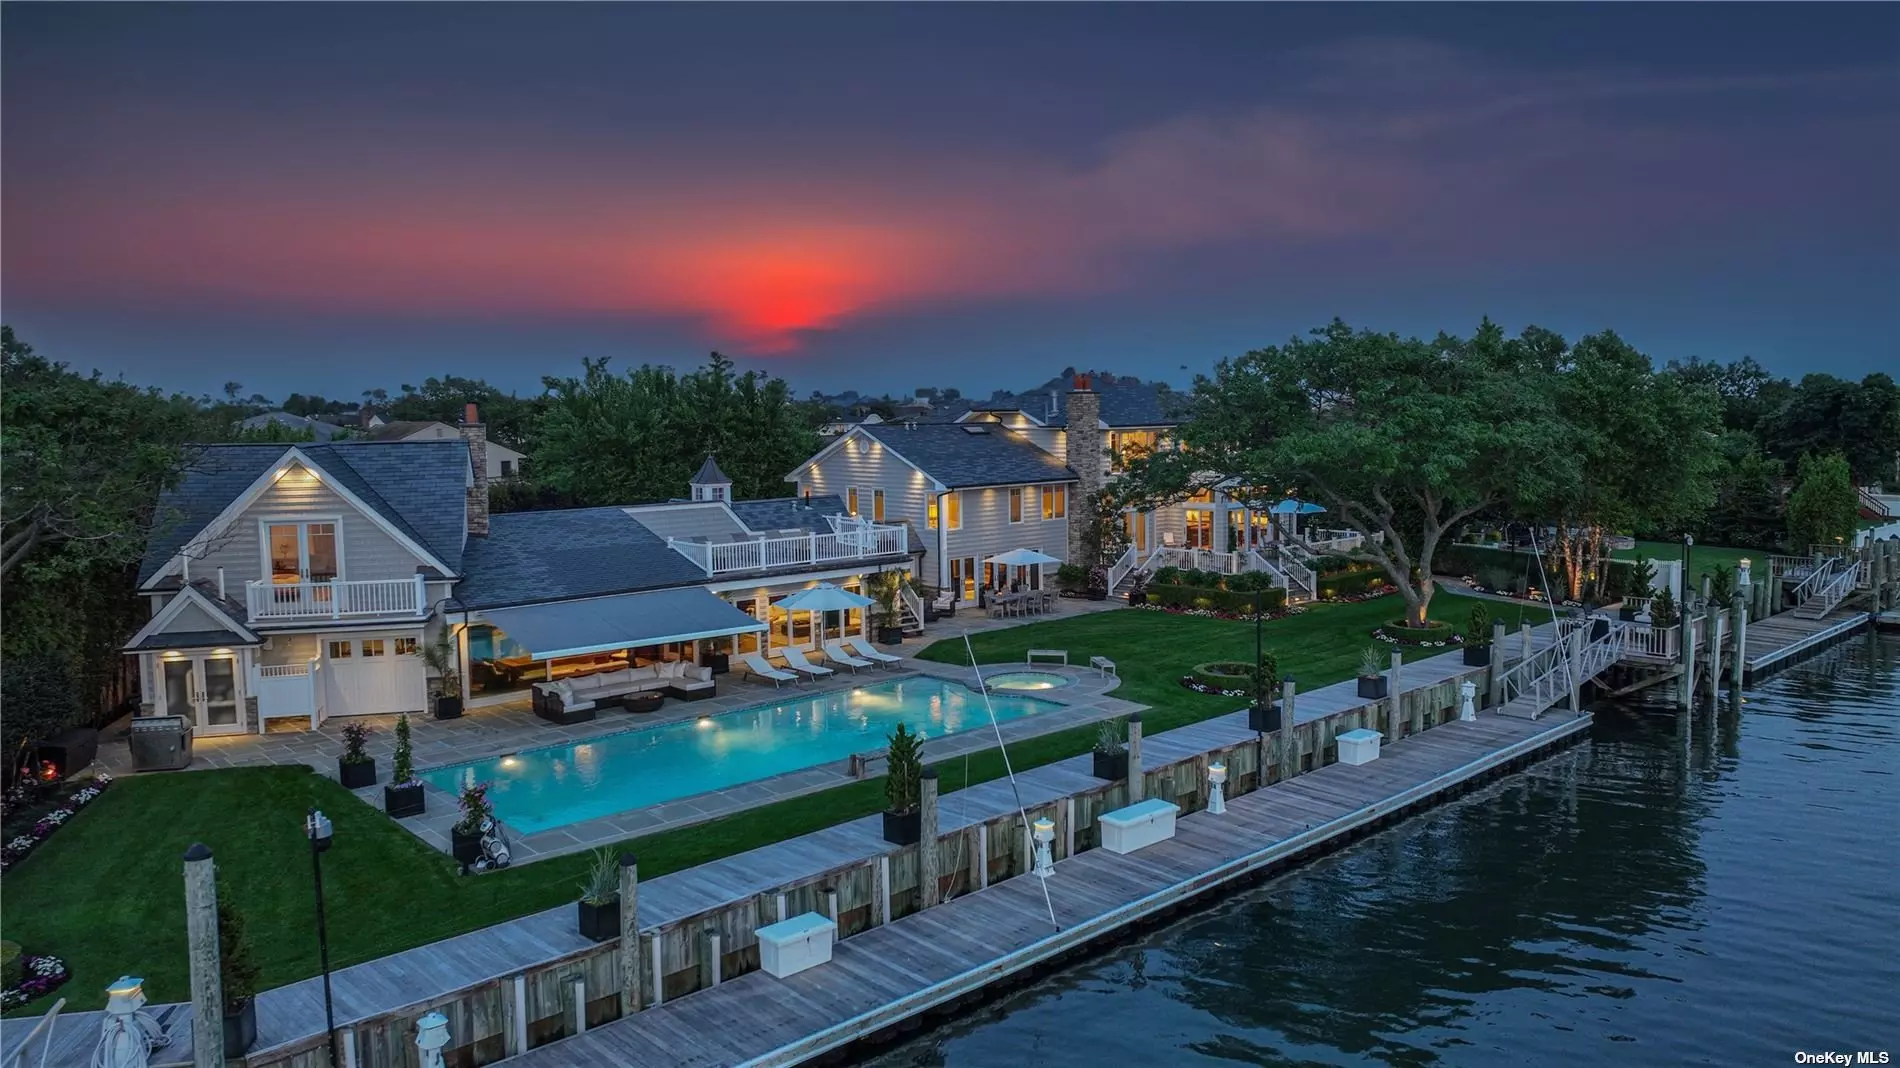 Experience the epitome of luxury living with this spectacular new listing in a coveted Bayfront location. Situated on a double lot, this exquisite property offers breathtaking water views and the idyllic Hamptons lifestyle, all within an easy commute. This architectural masterpiece boasts a grand total of six bedrooms and six bathrooms, providing ample space for both relaxation and entertainment. Step inside to discover a meticulously designed home that caters to your every desire. Indulge in the ultimate outdoor oasis, featuring an in-ground pool with a jacuzzi, perfect for unwinding and enjoying the sun-drenched days. A 140&rsquo; floating dock provides direct access to the water that will accommodate your yacht and is 3 minutes ride to the ocean, allowing you to embark on aquatic adventures or simply take in the serene waterfront scenery. Inside, the luxury continues with a state-of-the-art home theater, where you can immerse yourself in cinematic experiences from the comfort of your own private retreat. The property also includes a private guest suite, ensuring that your visitors experience the same level of opulence and comfort as you do. Entertain with style in the expansive living spaces, seamlessly blending indoor and outdoor living. The indoor and outdoor speakers create a harmonious ambiance throughout, whether you&rsquo;re hosting a soir?e or simply relaxing with loved ones. Wake up to awe-inspiring vistas from the master suite, designed to provide a serene sanctuary. The breathtaking water views and luxurious amenities offer the perfect setting to start your day in pure bliss. Immerse yourself in the sought-after Hamptons lifestyle without sacrificing convenience. With an easy commute, you can enjoy the tranquility of waterfront living while still maintaining access to the vibrant city. This is your chance to own a slice of paradise that combines extraordinary beauty, luxurious amenities, and unparalleled views. Don&rsquo;t miss out on this incredible opportunity to embrace the waterfront lifestyle you&rsquo;ve always dreamed of. Live Epically, Live on the Bay!